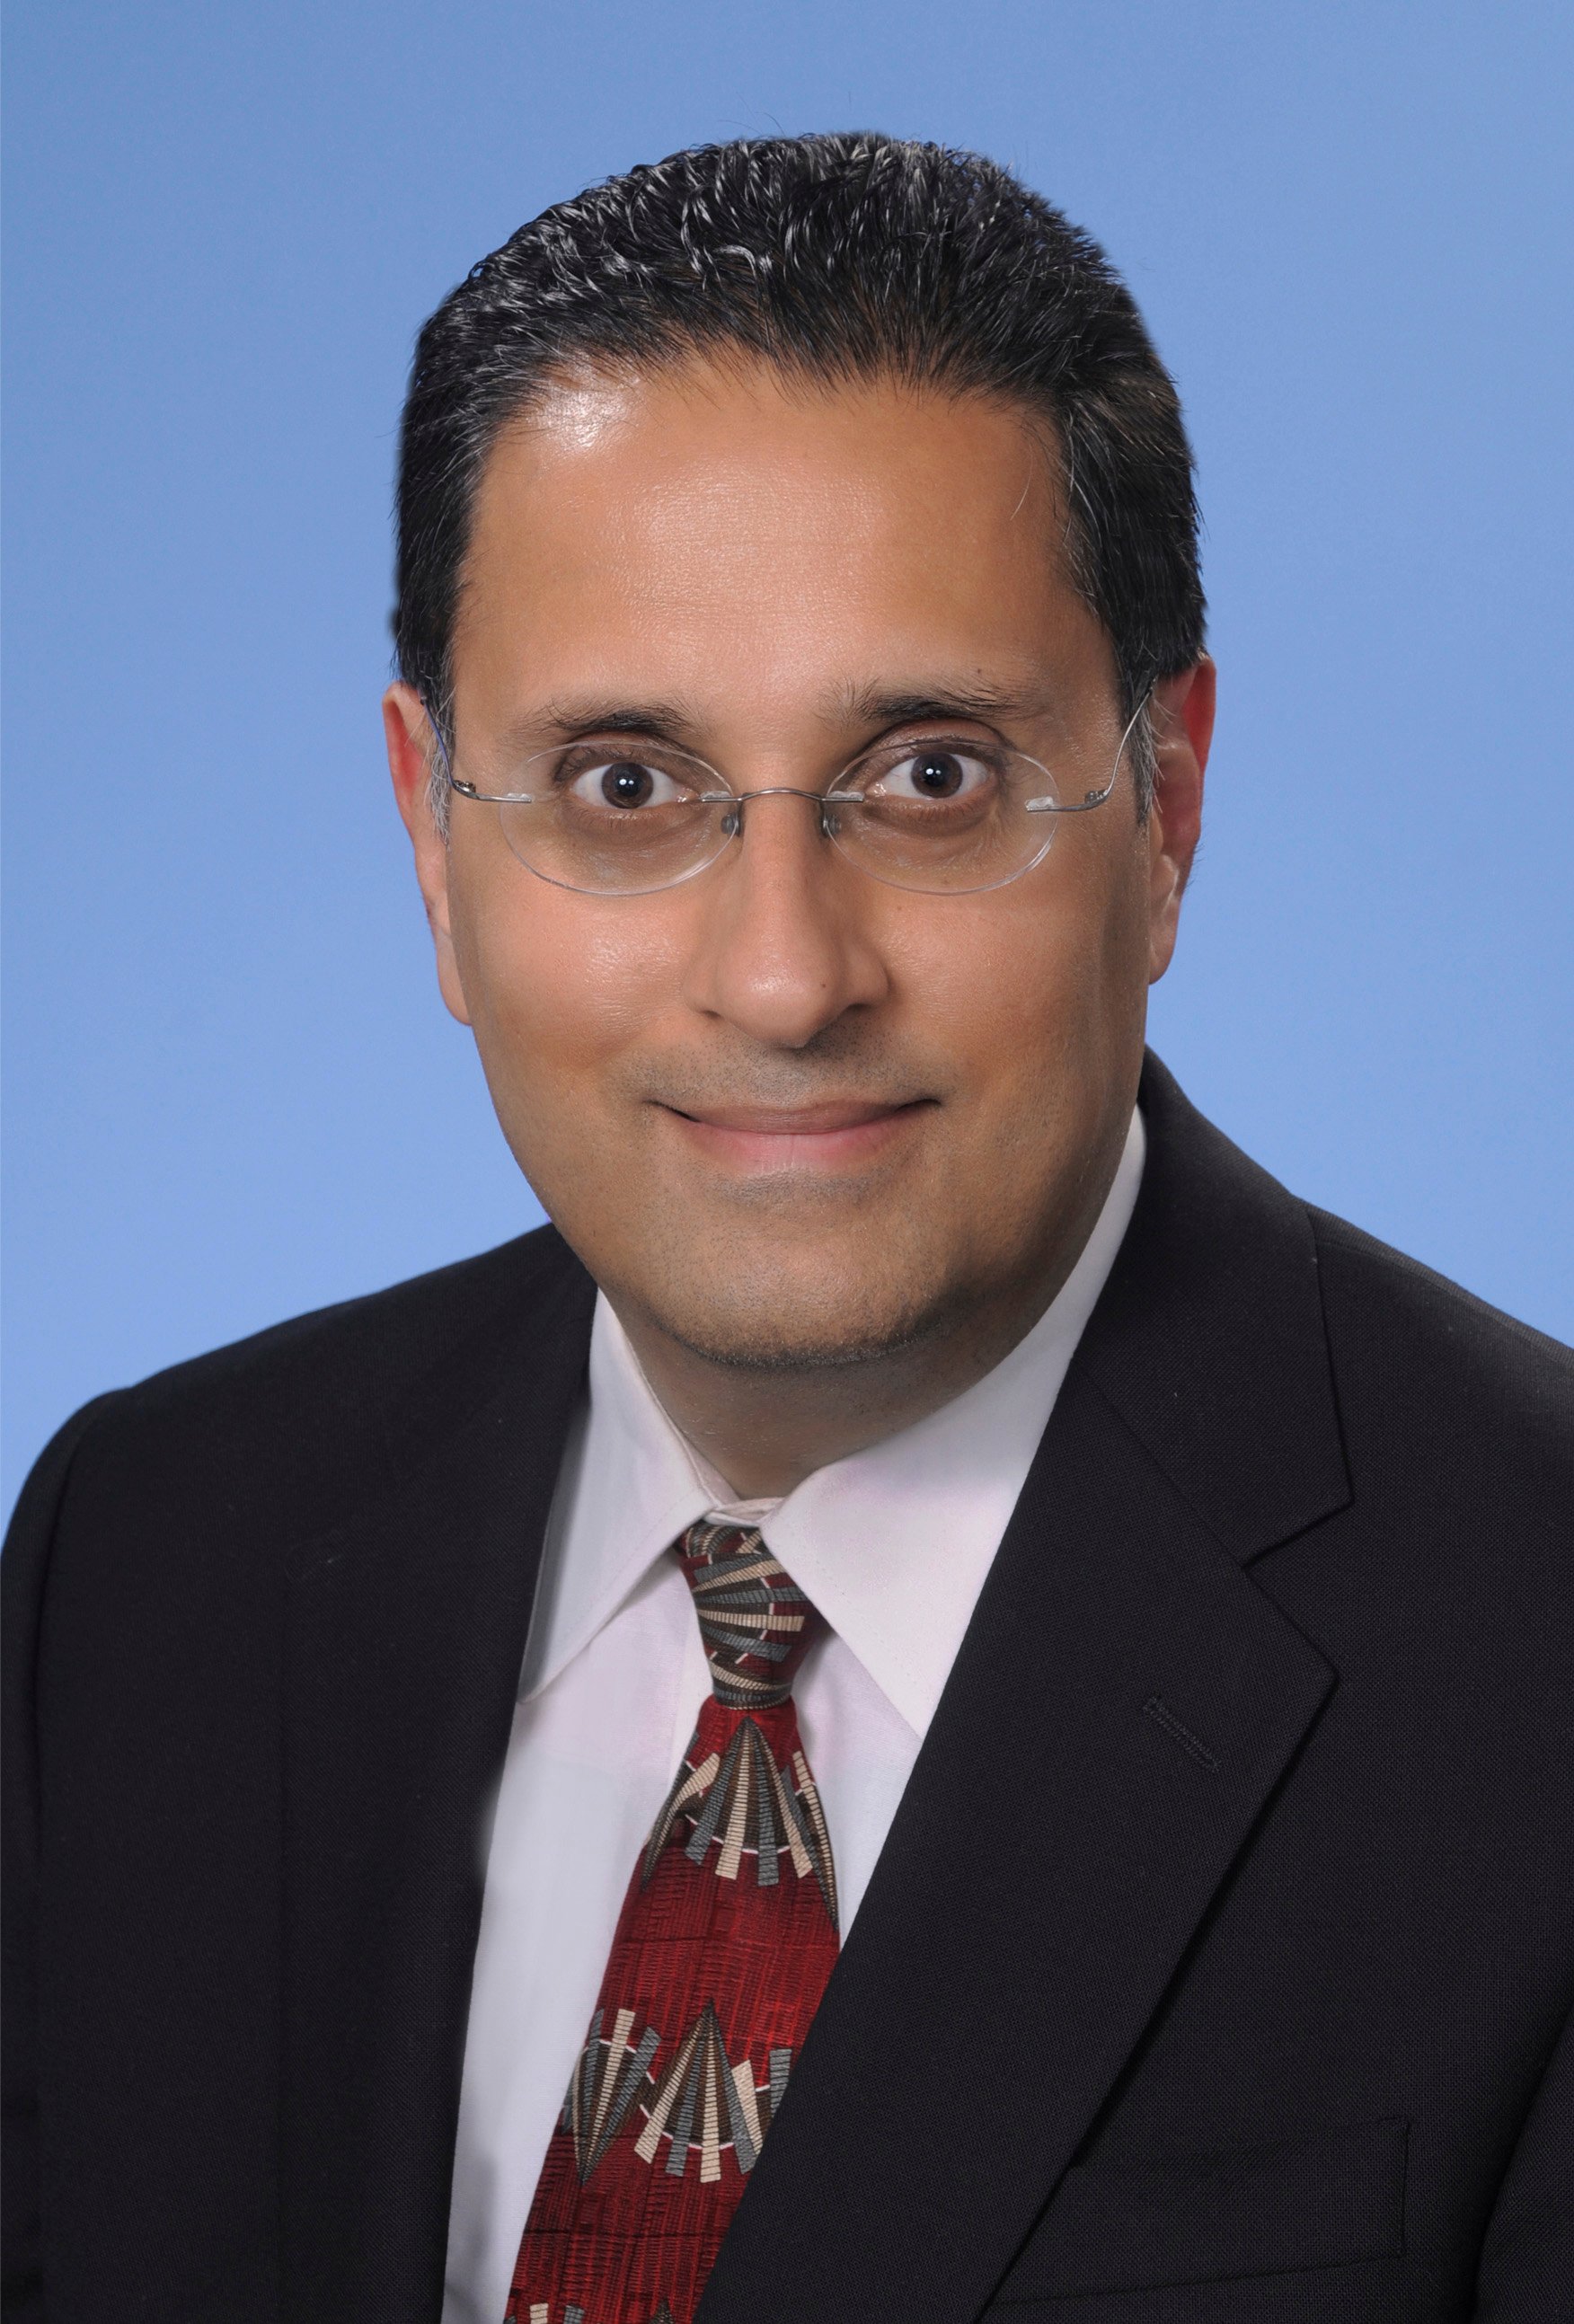 Hardeep Singh, professor at Baylor College of Medicine and the Center for Innovations in Quality, Effectiveness and Safety (IQuESt)